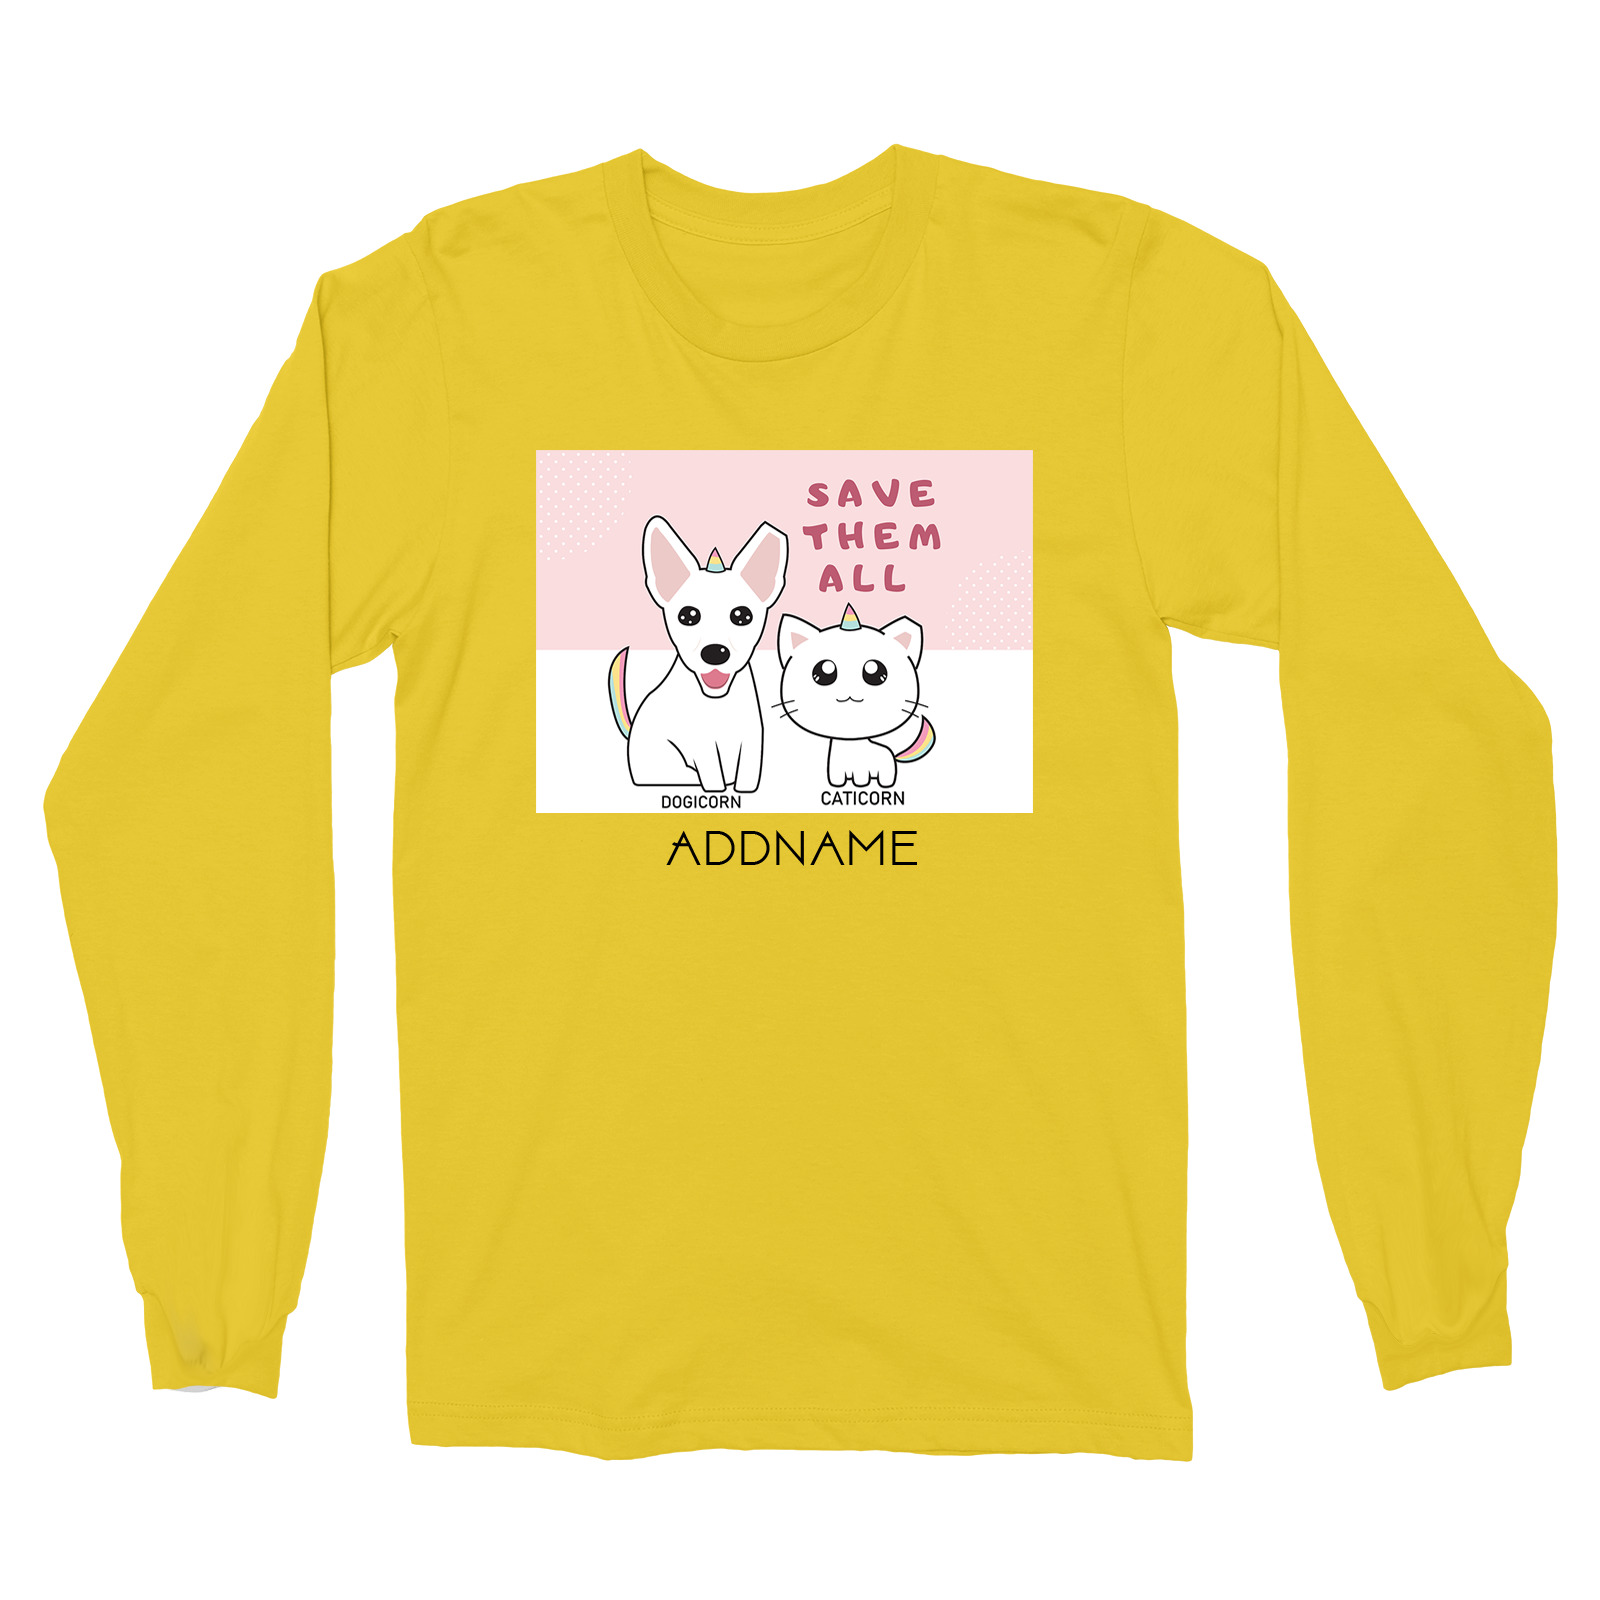 Sherlyn Mama Cute Mix Dogicorn and Caticorn Accessories Addname Long Sleeve Unisex T-Shirt